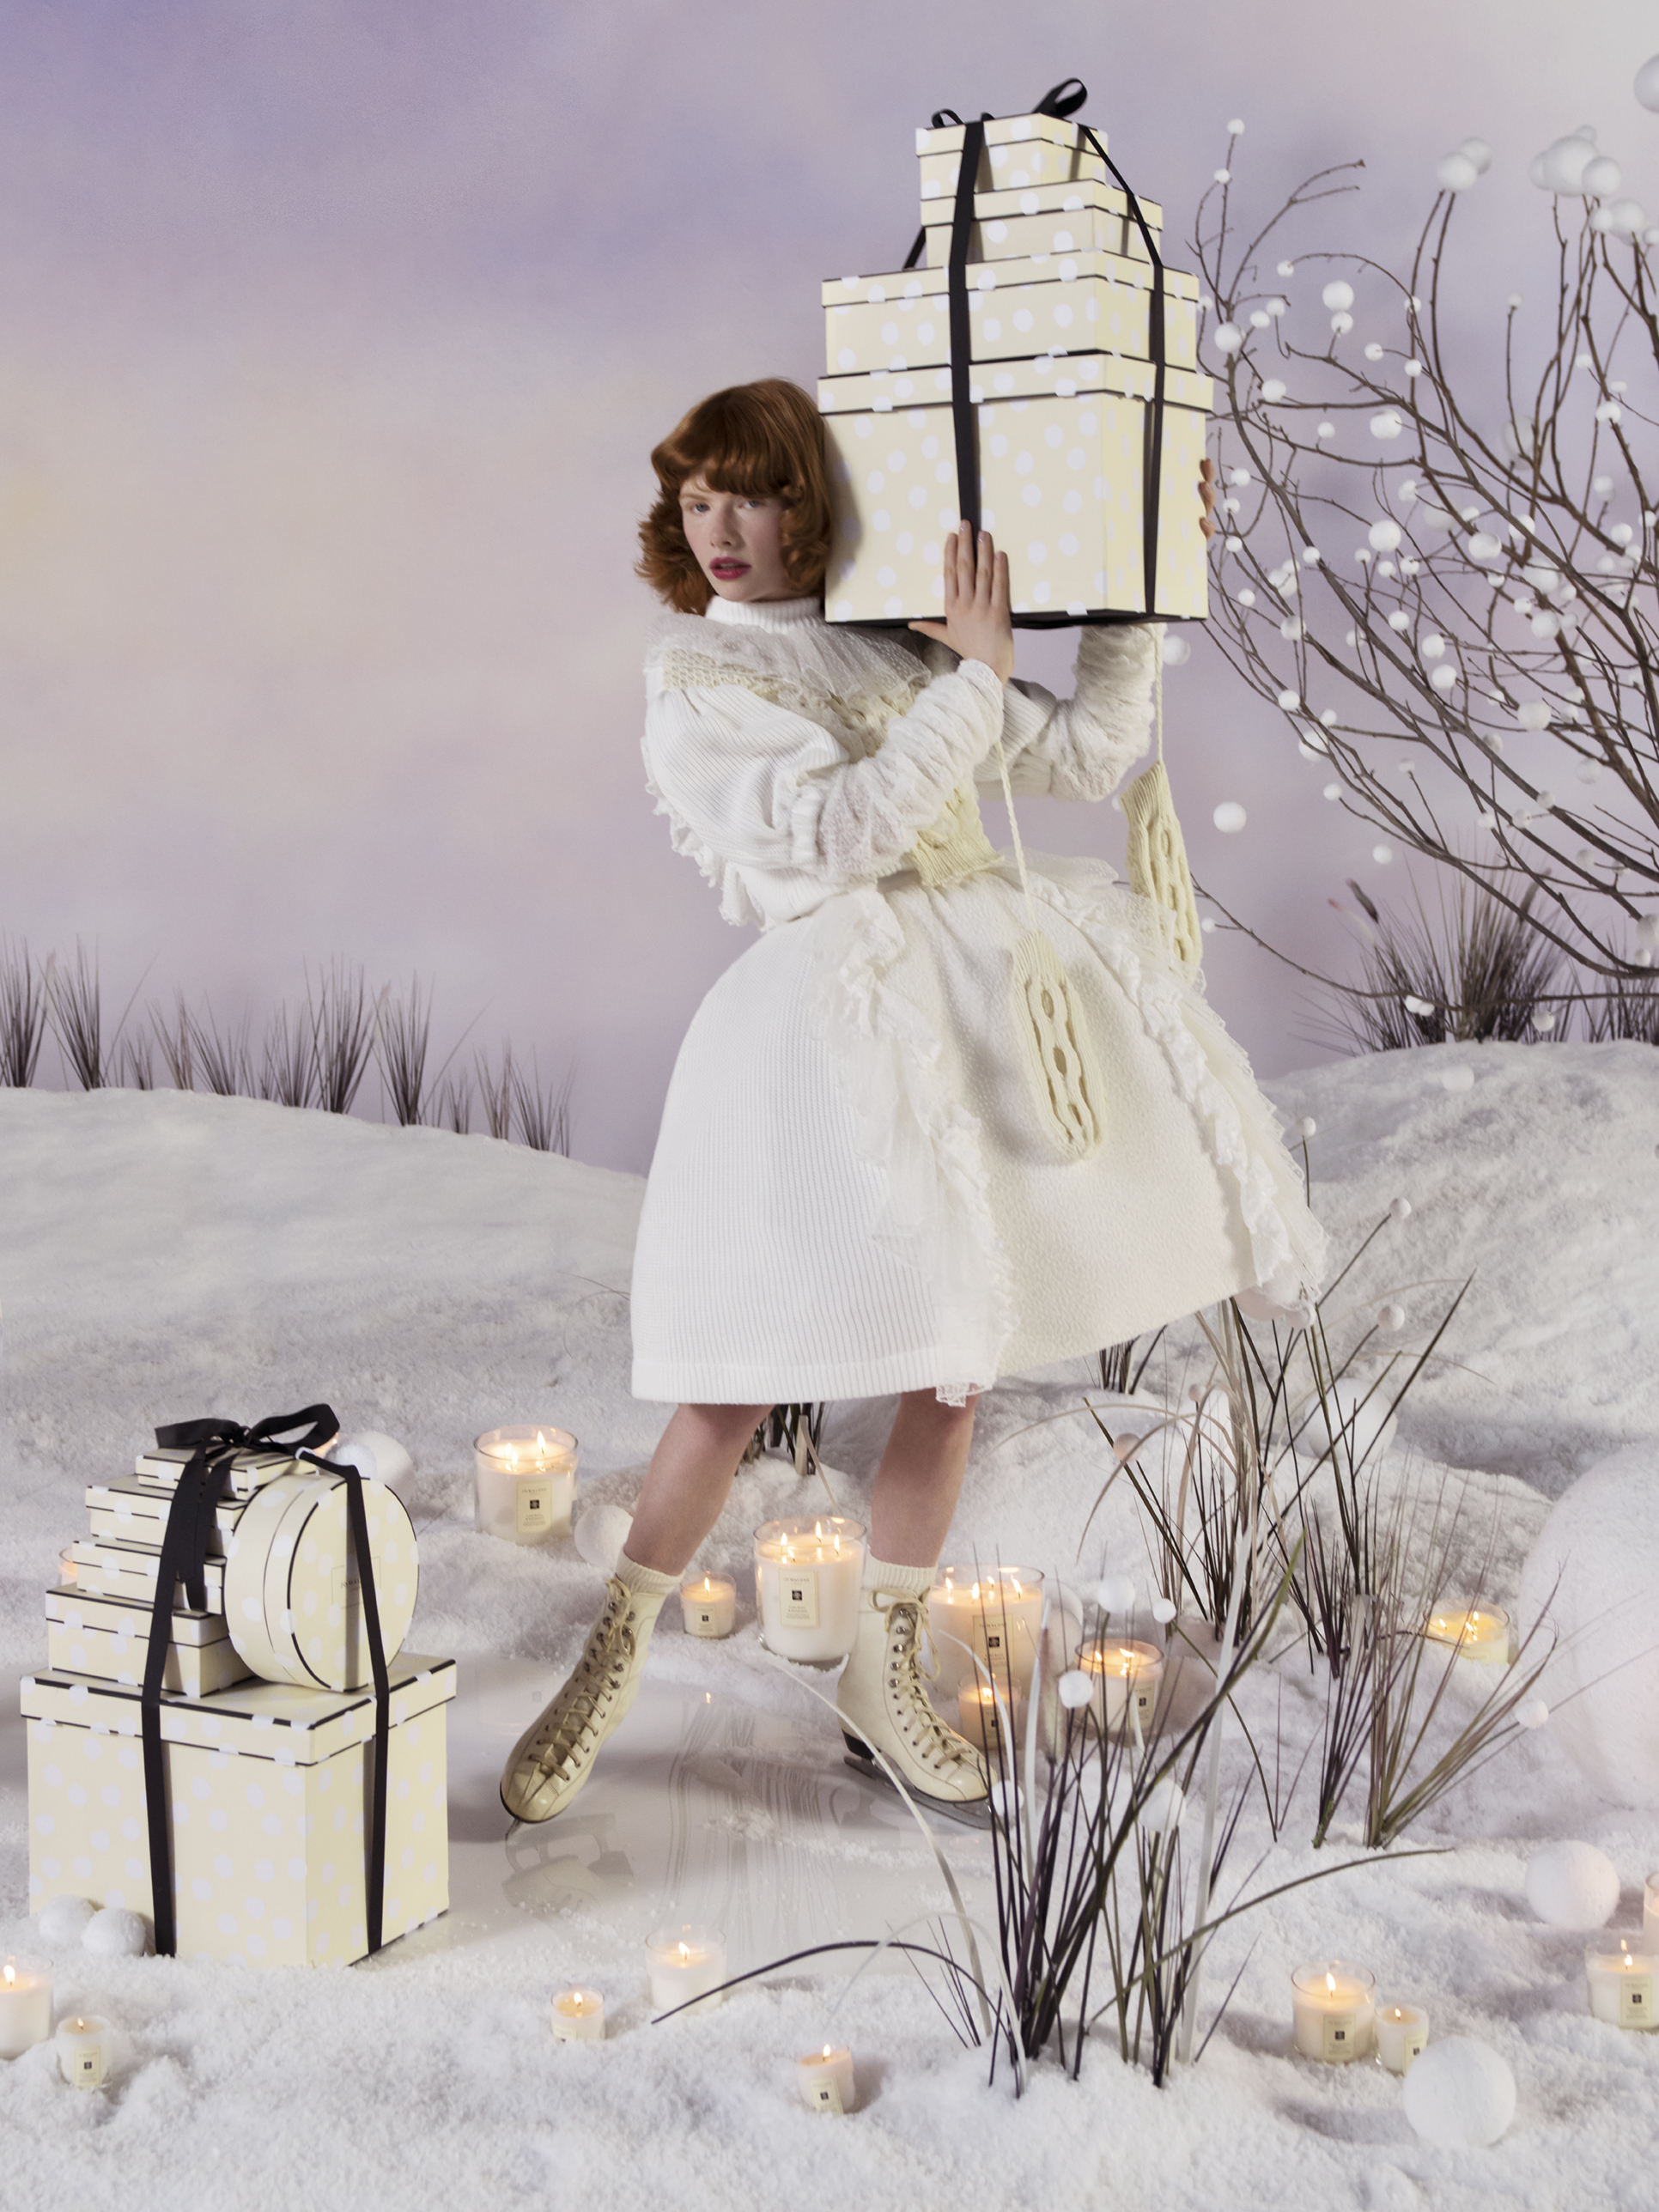 woman in a white coat and dress on ice skates holding jo malone gift boxes in a winter wonderland.
